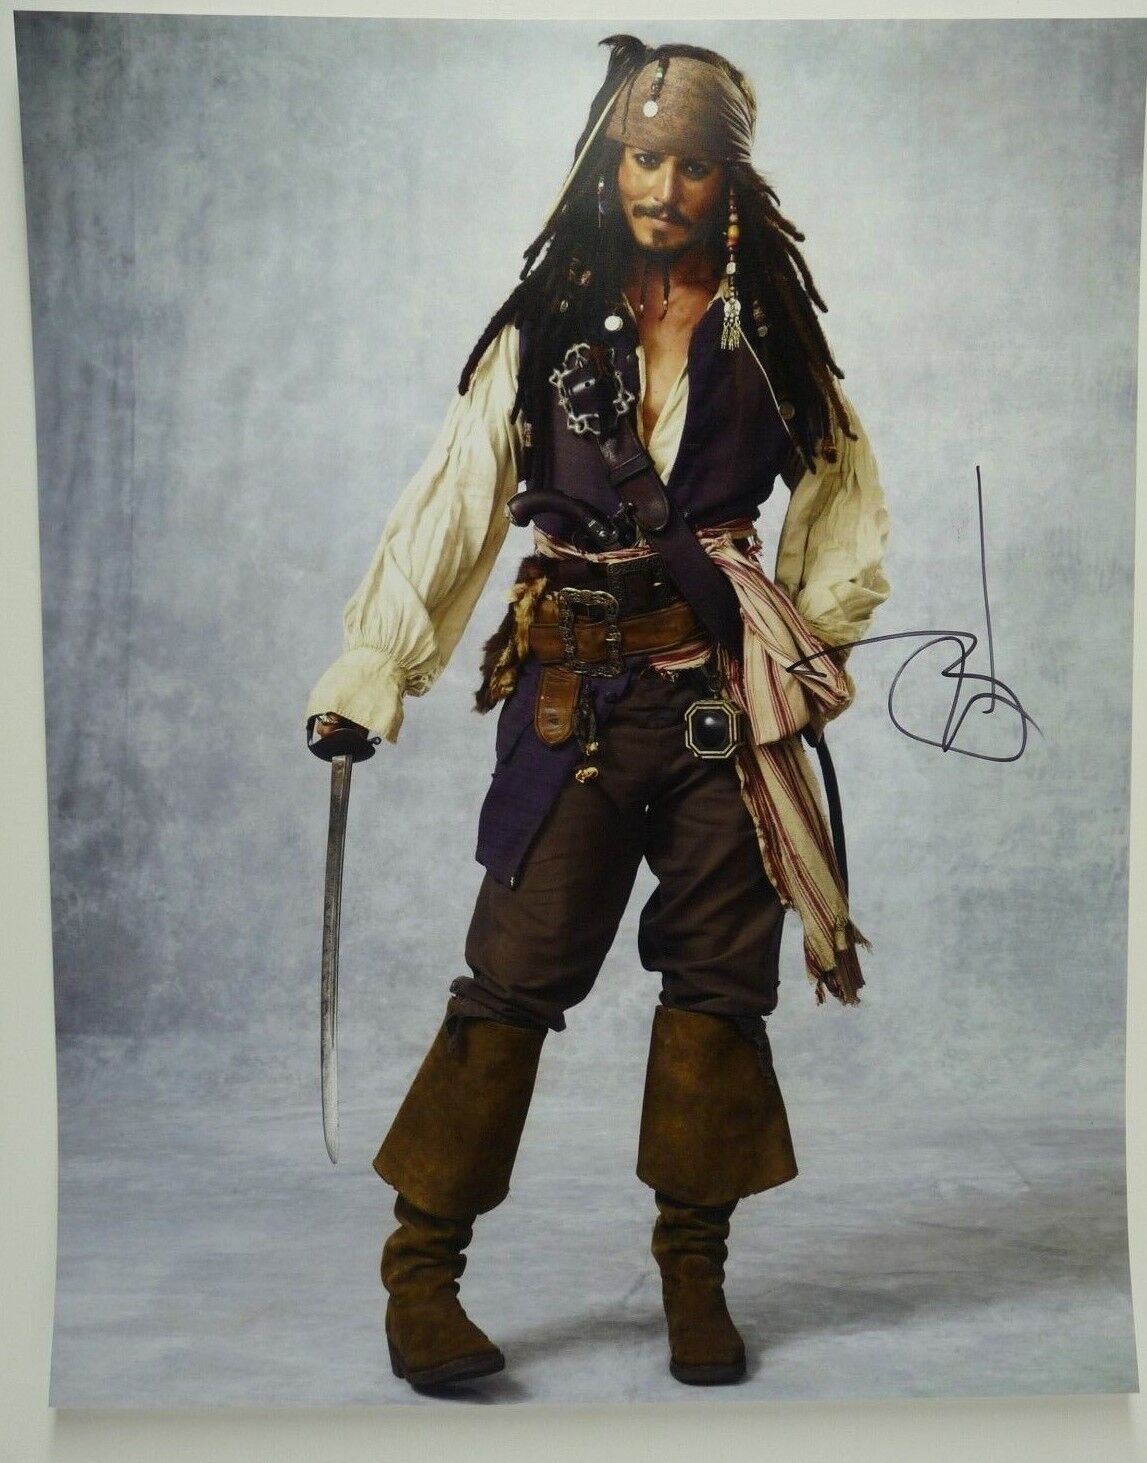 Johnny Depp Signed Autographed Sexy Pirates 16x20 Photo Poster painting Beckett Certified #2 G1